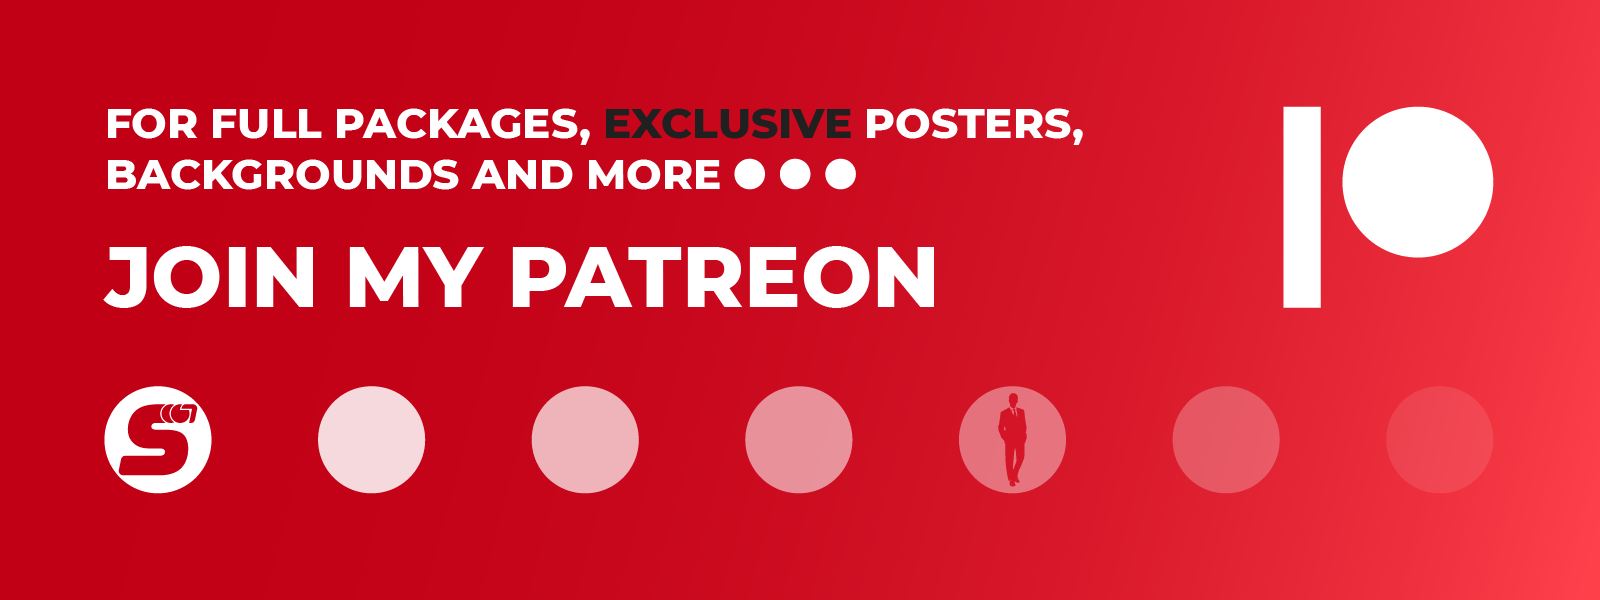 join my patreon full.png